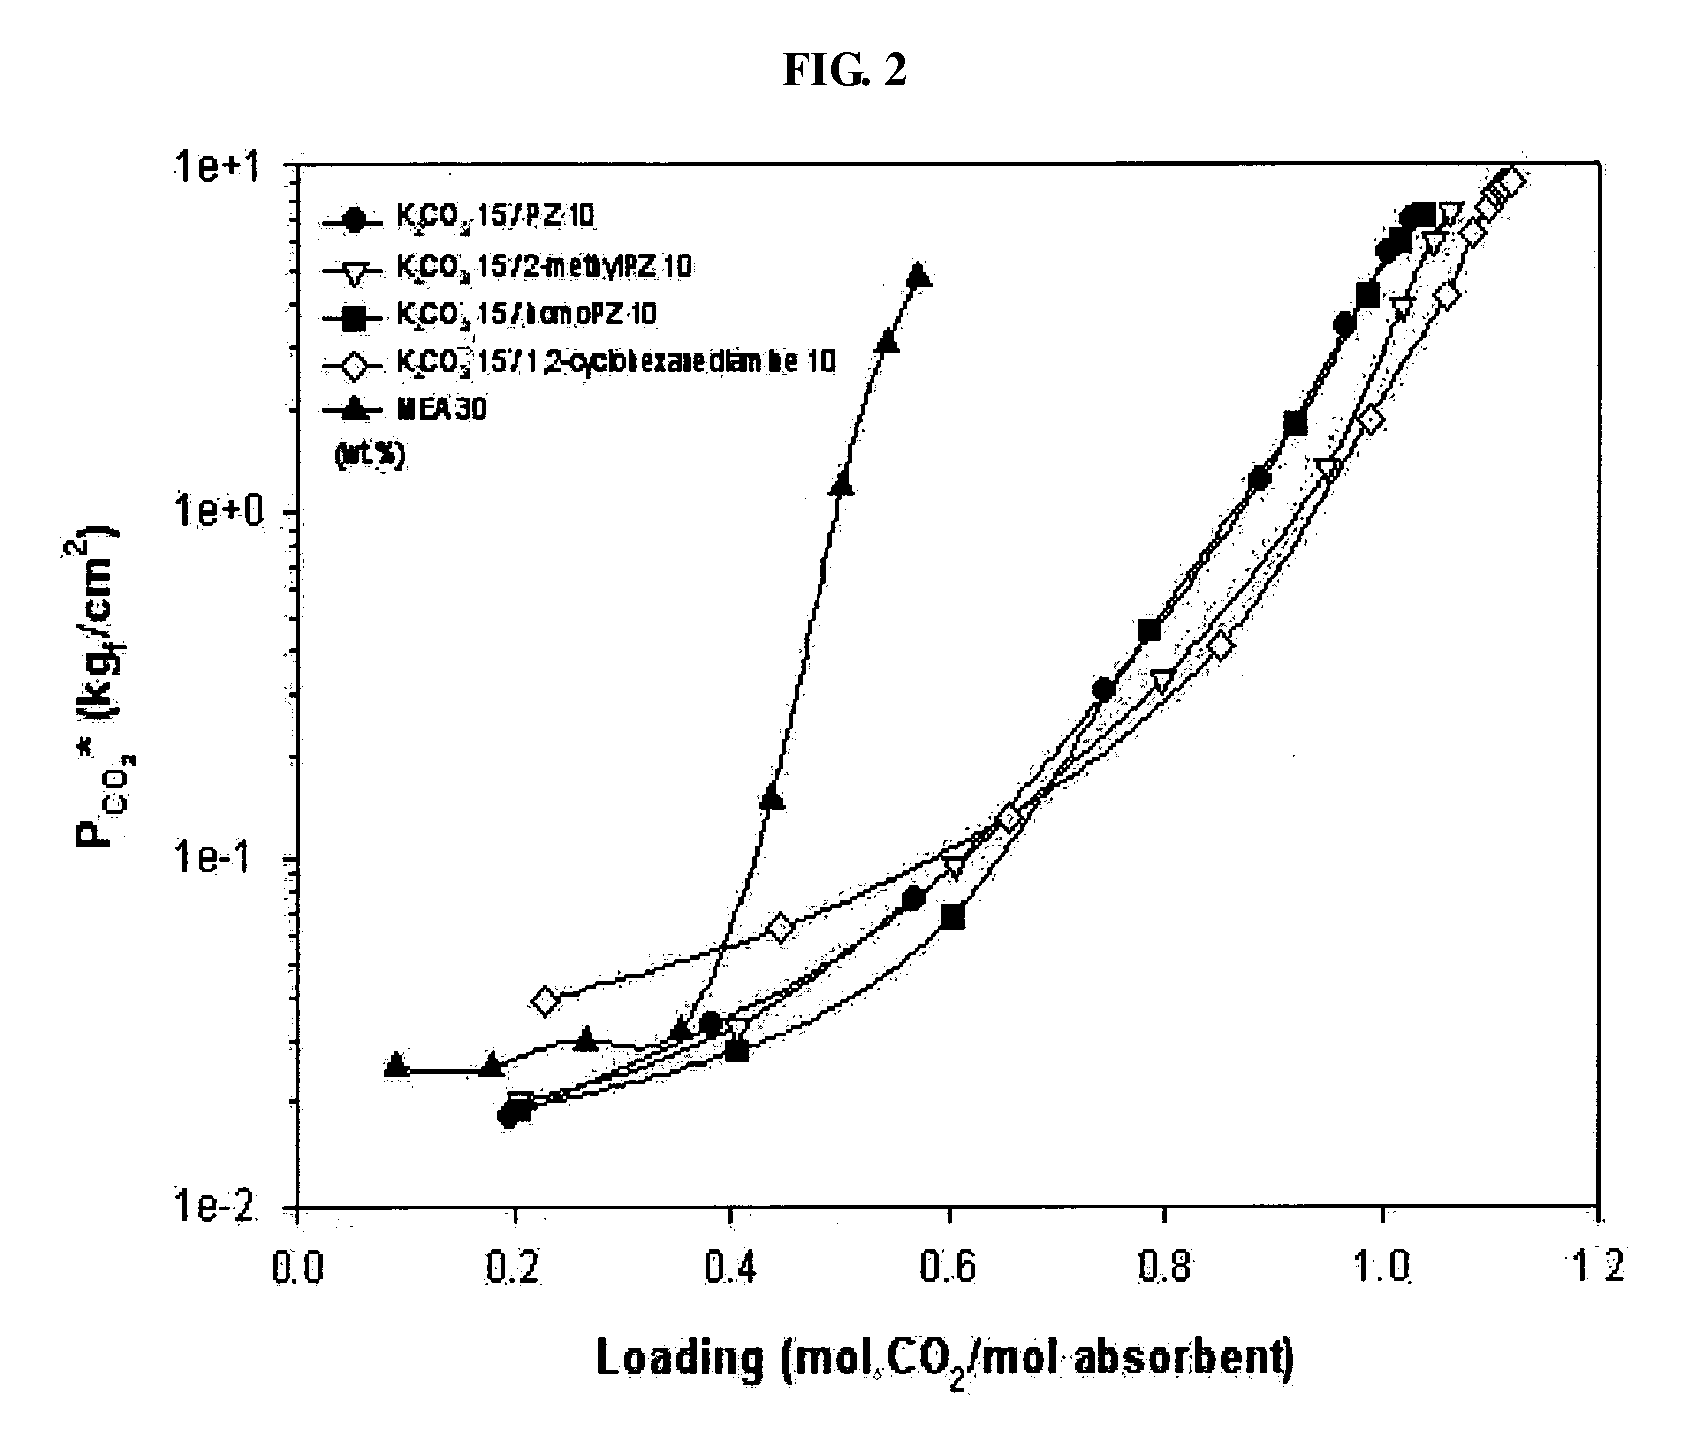 Alkali-Carbonate-Based Carbon Dioxide Absorbent Containing Added Sterically Hindered Cyclic Amines, and Method for Removing Carbon Dioxide Removing Using Same